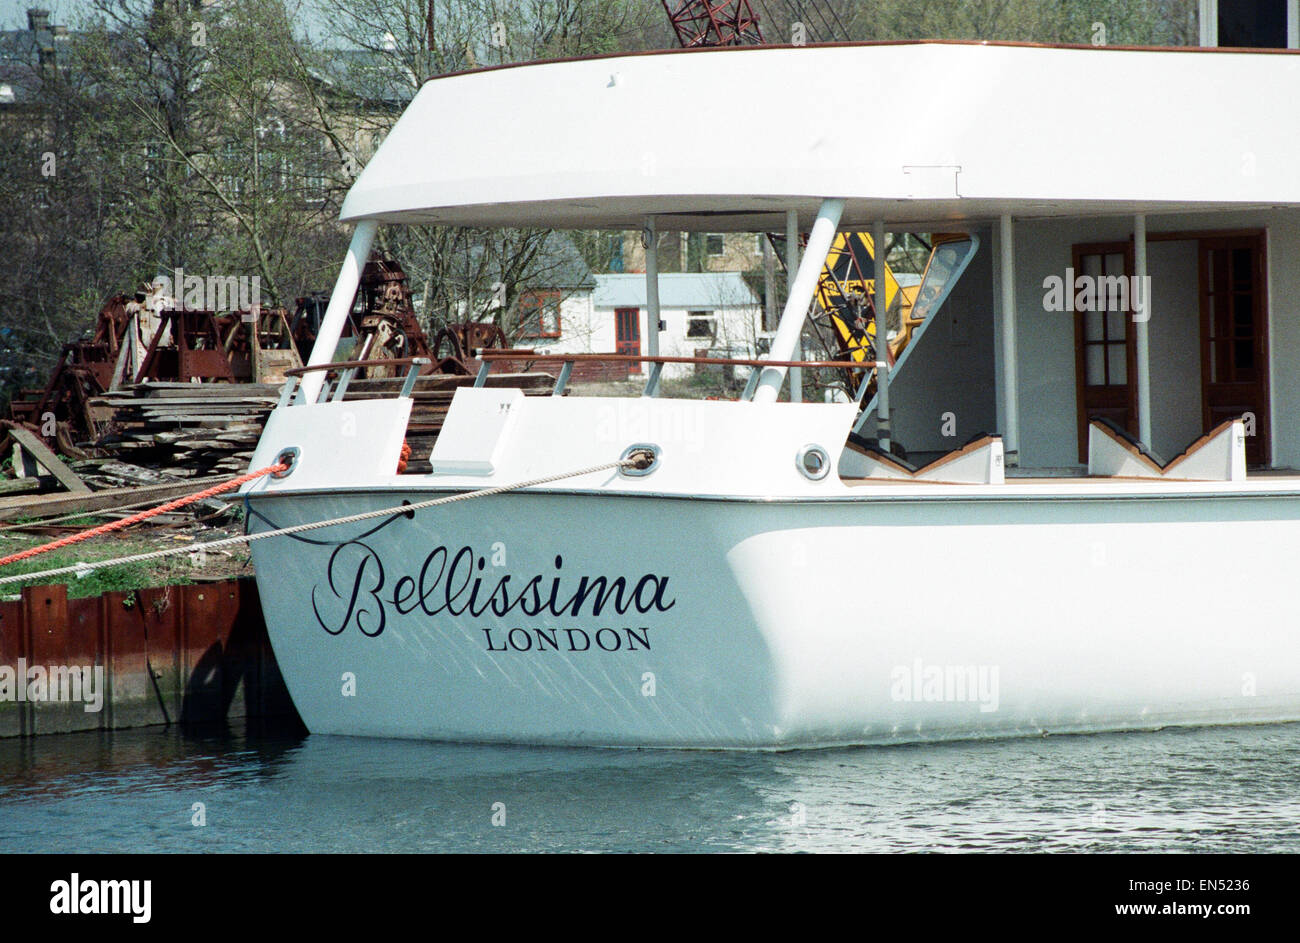 Luxury yacht Bellissima, owned by businessman Bernard Matthews, founder of Bernard Matthews Farms Limited, 10th March 1989. Bellissimo is italian for 'most beautiful'. Stock Photo